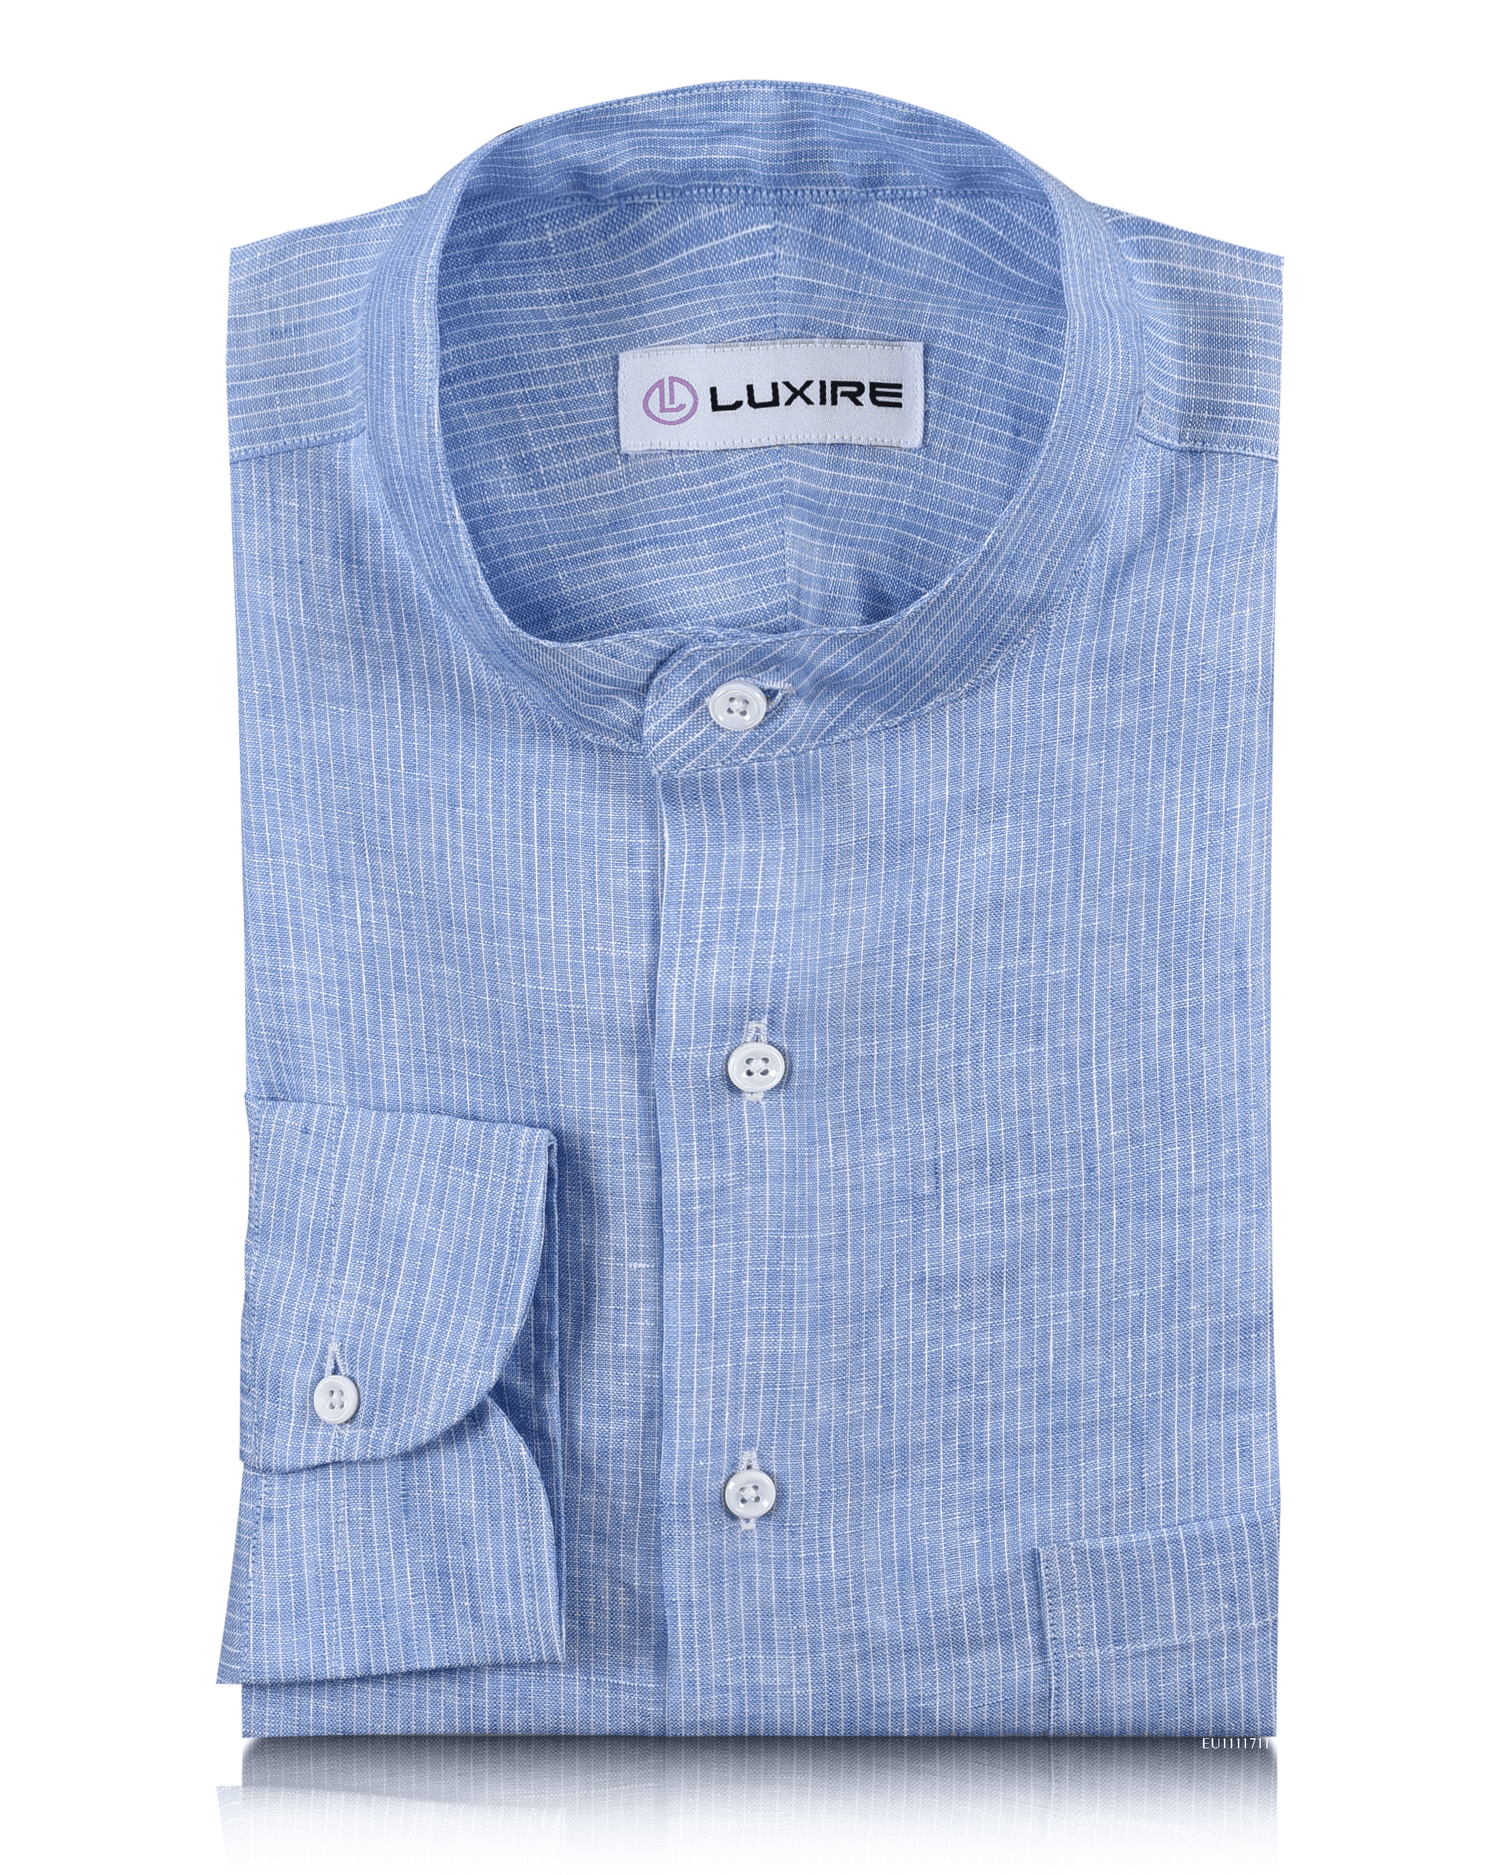 Front of the custom linen shirt for men in white and blue stripes by Luxire Clothing